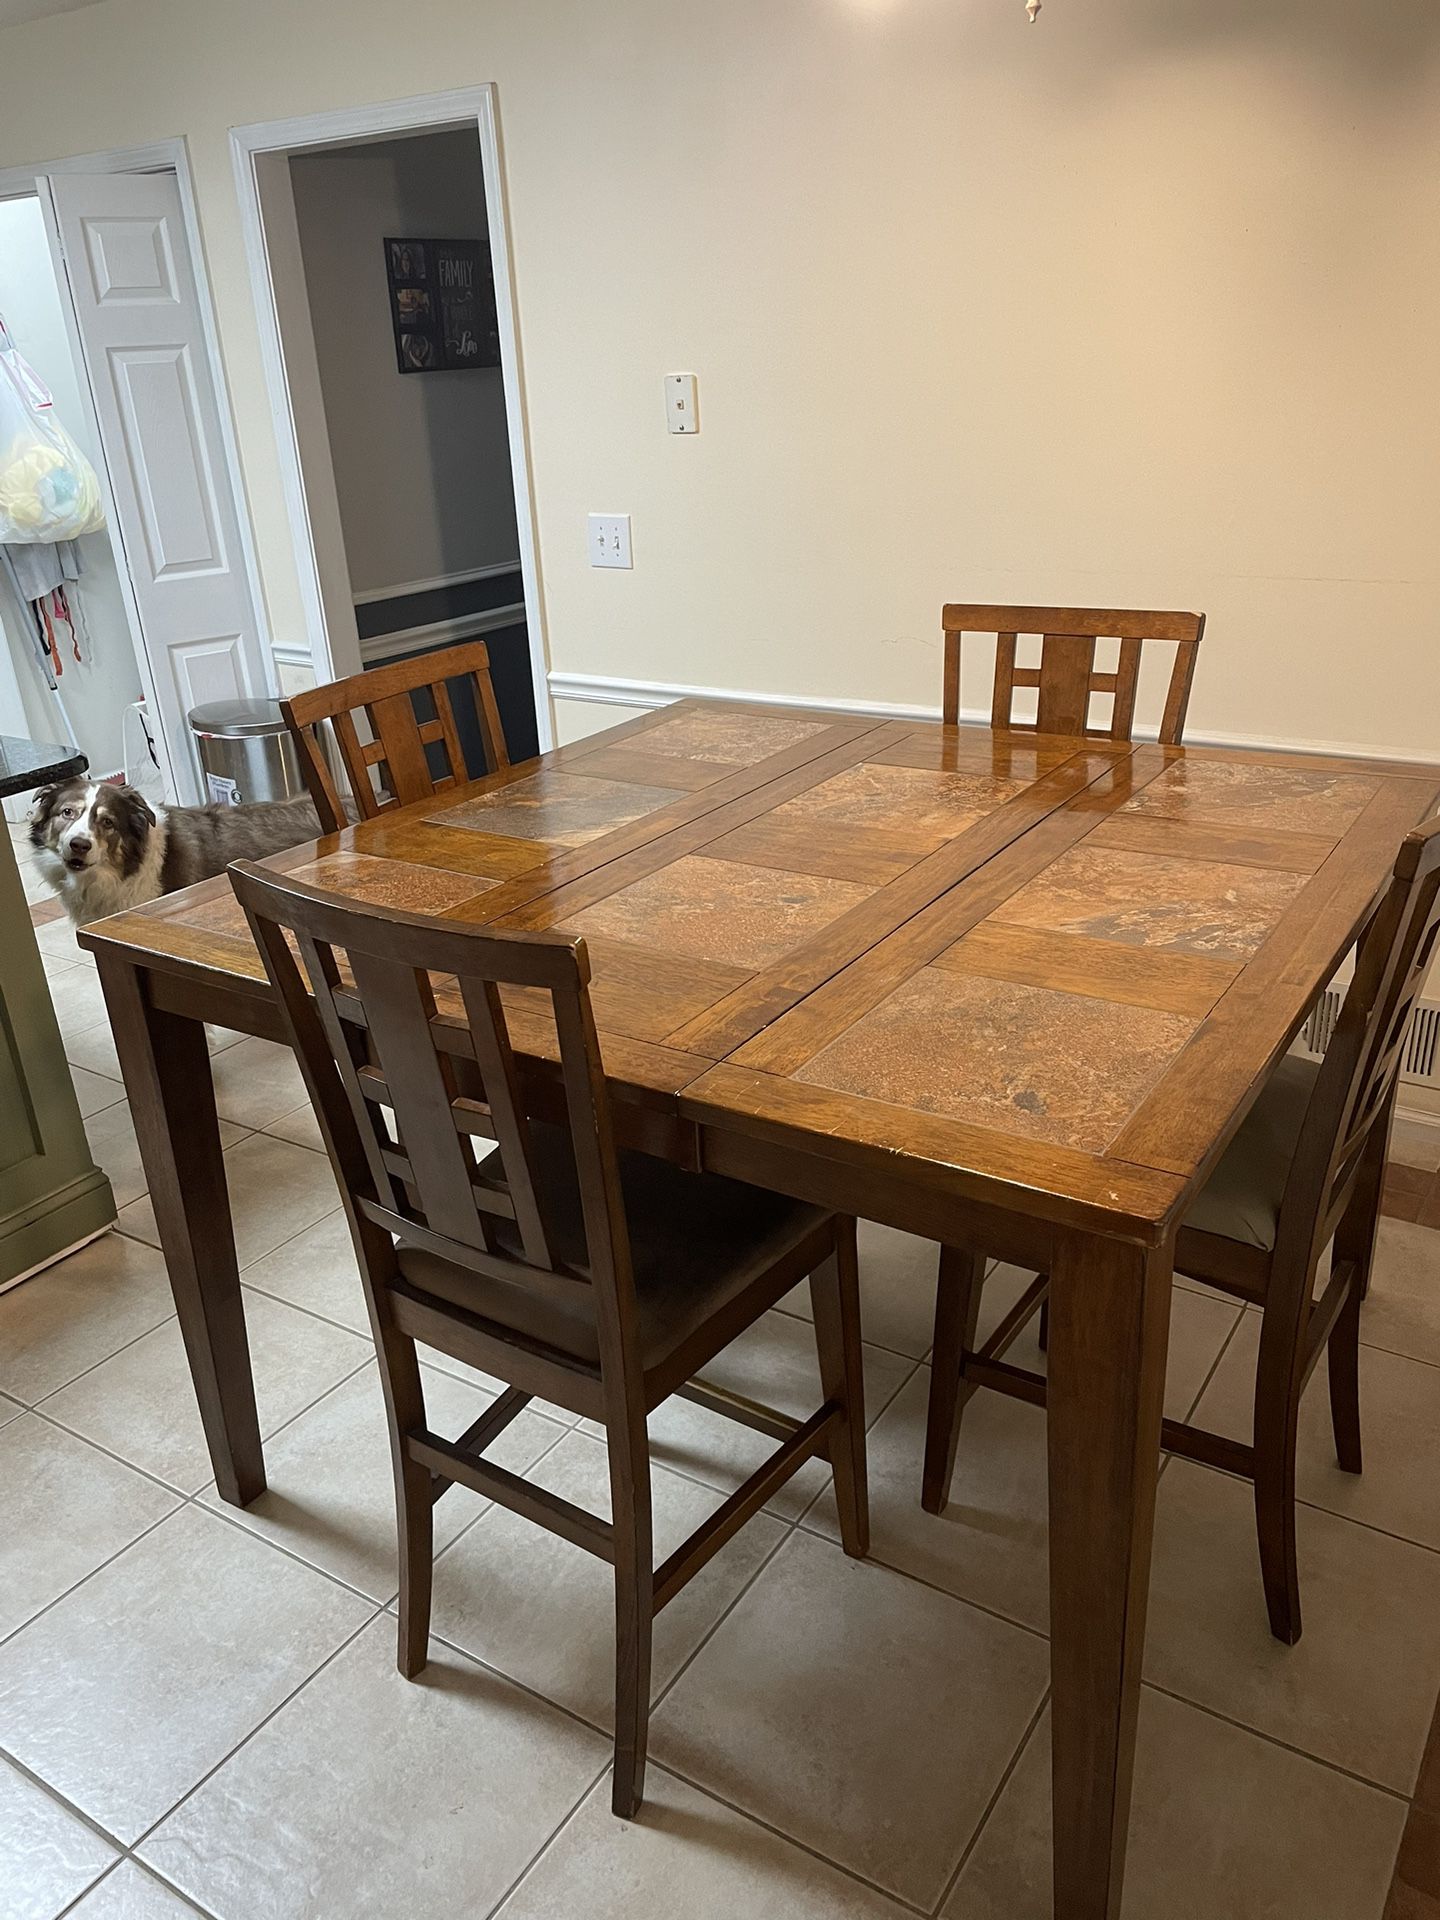 Large Wooden Dining Table & Chairs